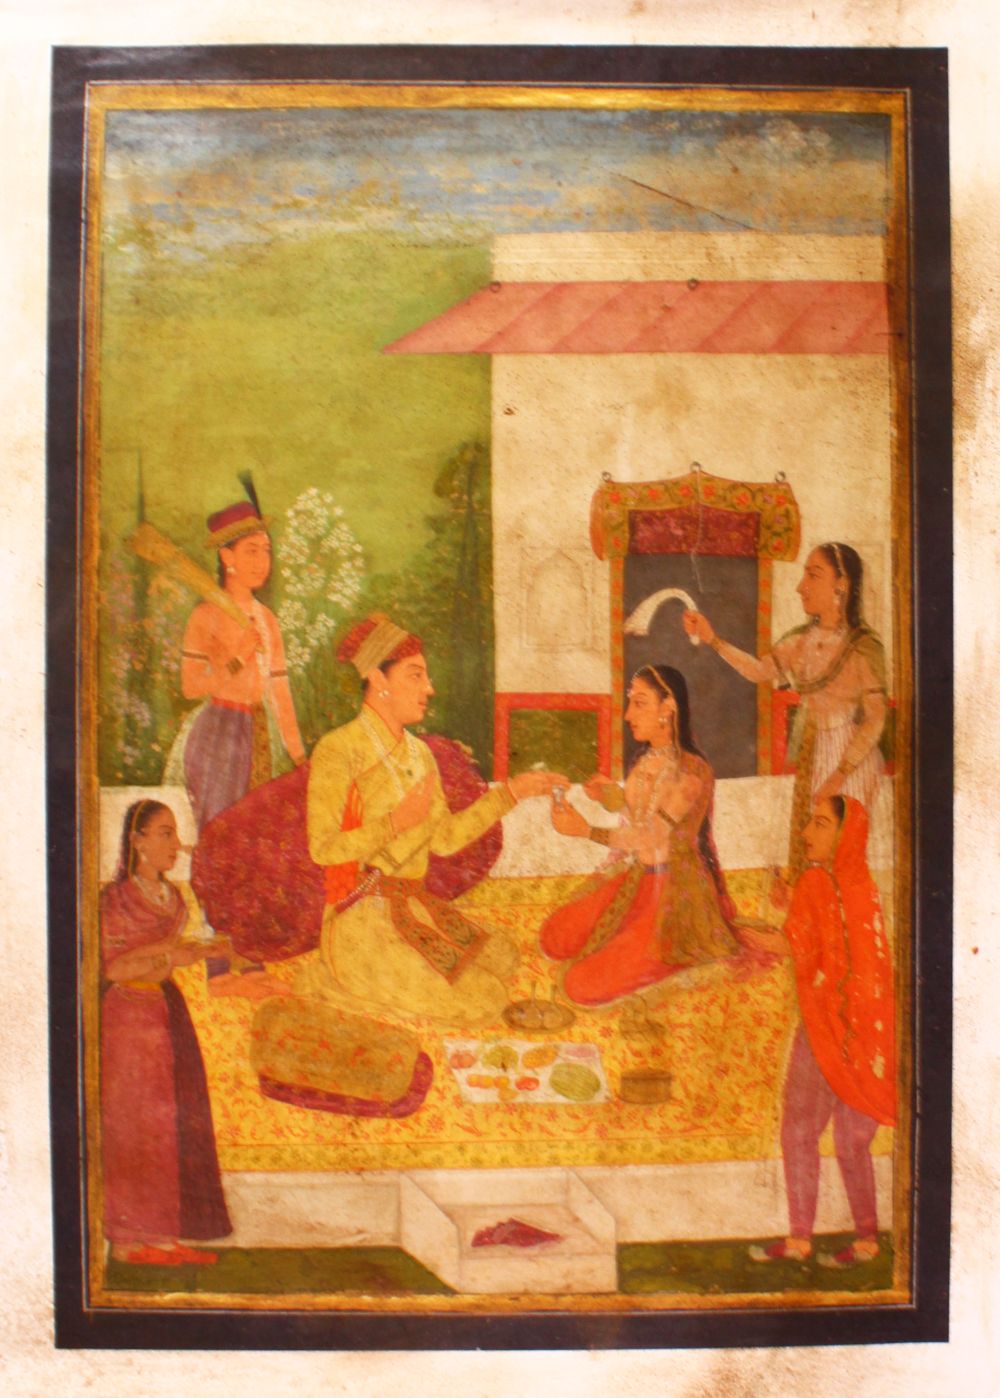 AN INDIAN PAINTING ON CANVASS OF PRINCE AND ATTENDANTS, seated in the garden having a picnic, 83cm x